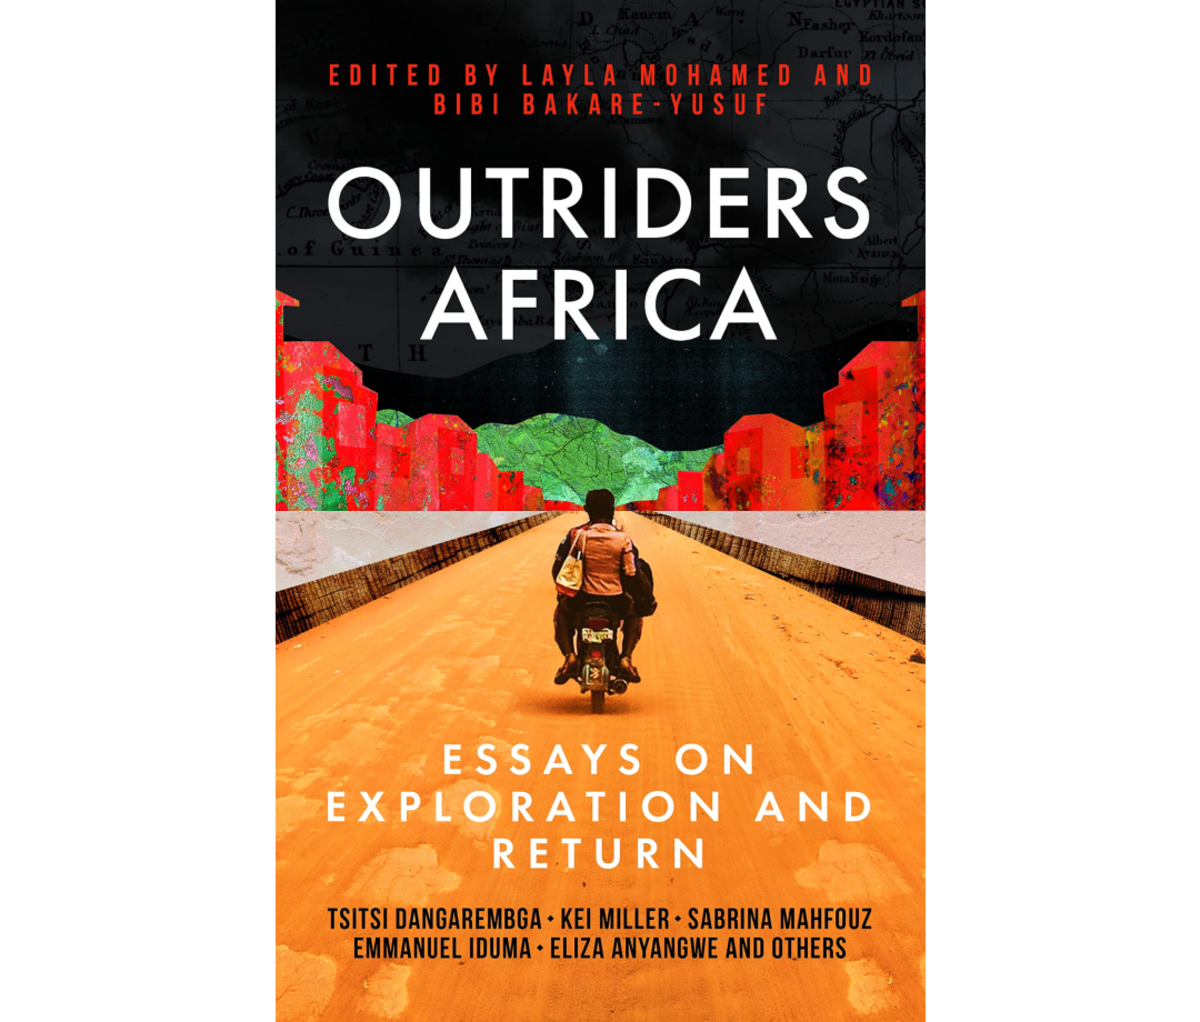 https://www.mensjournal.com/.image/t_share/MTk2MTM2OTg4MTE3NjQwNzA5/outriders-africa--essays-on-exploration-and-return-various-authors.png